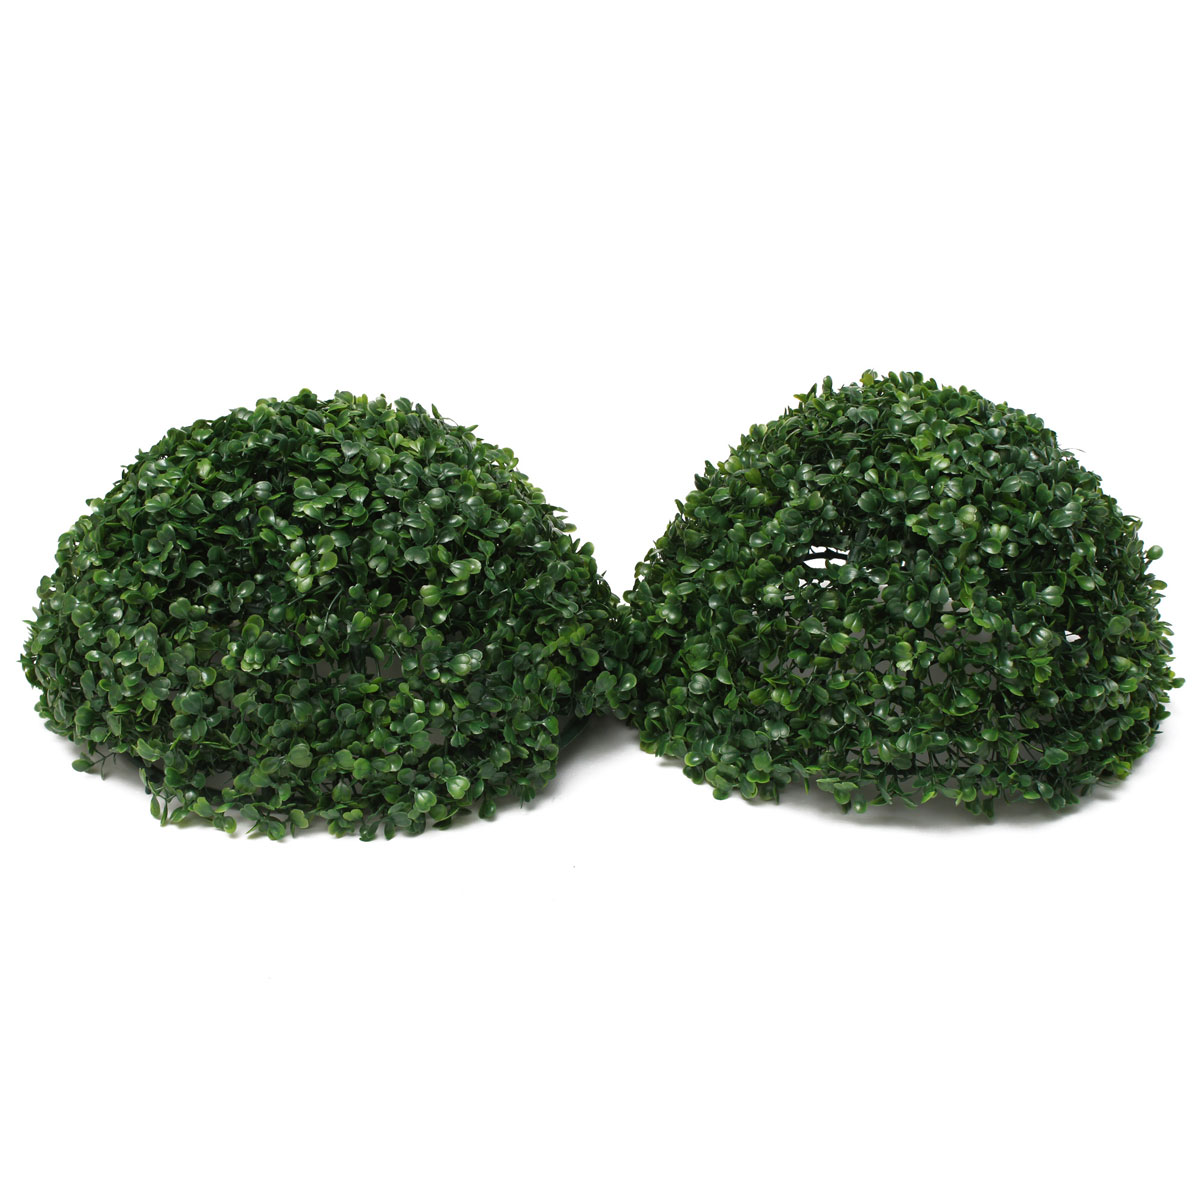 35cm-Plastic-Artificial-Topiary-Grass-Ball-Leaf-Effect-Ball-Wedding-Gardening-Hanging-Decoration-1036994-5